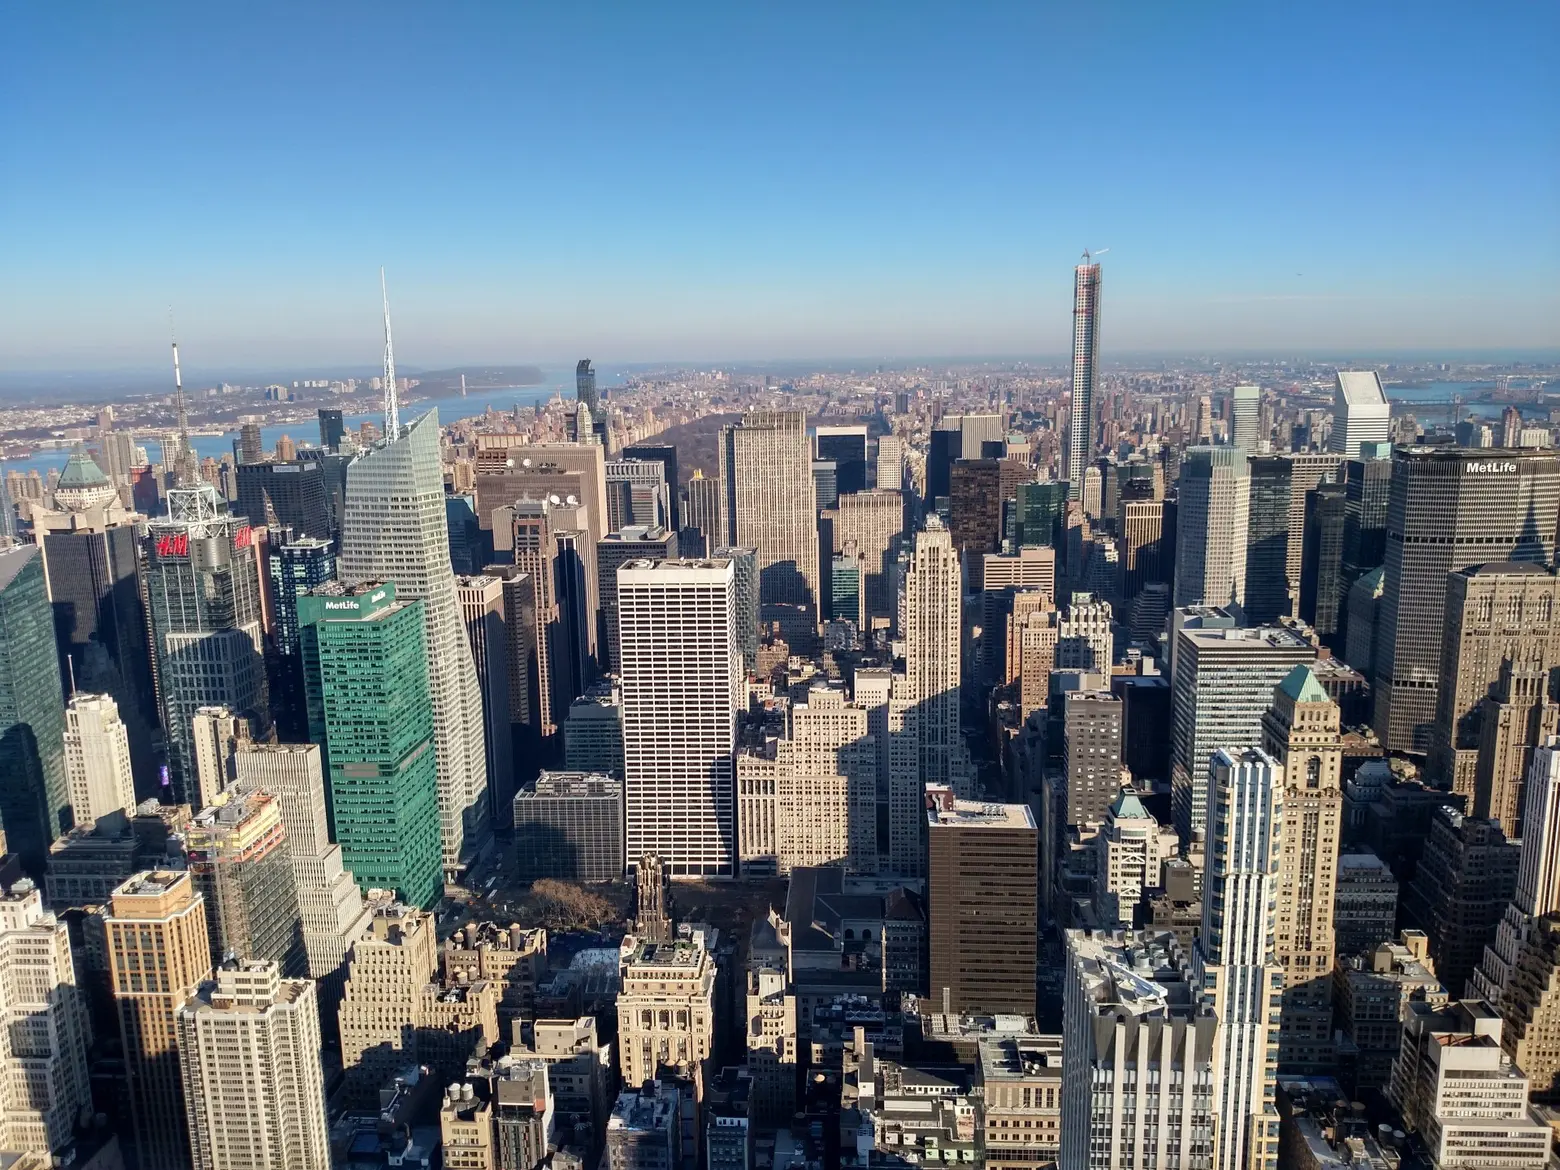 Study shows huge disparity in U.S. urban land value, with NYC making up 10%